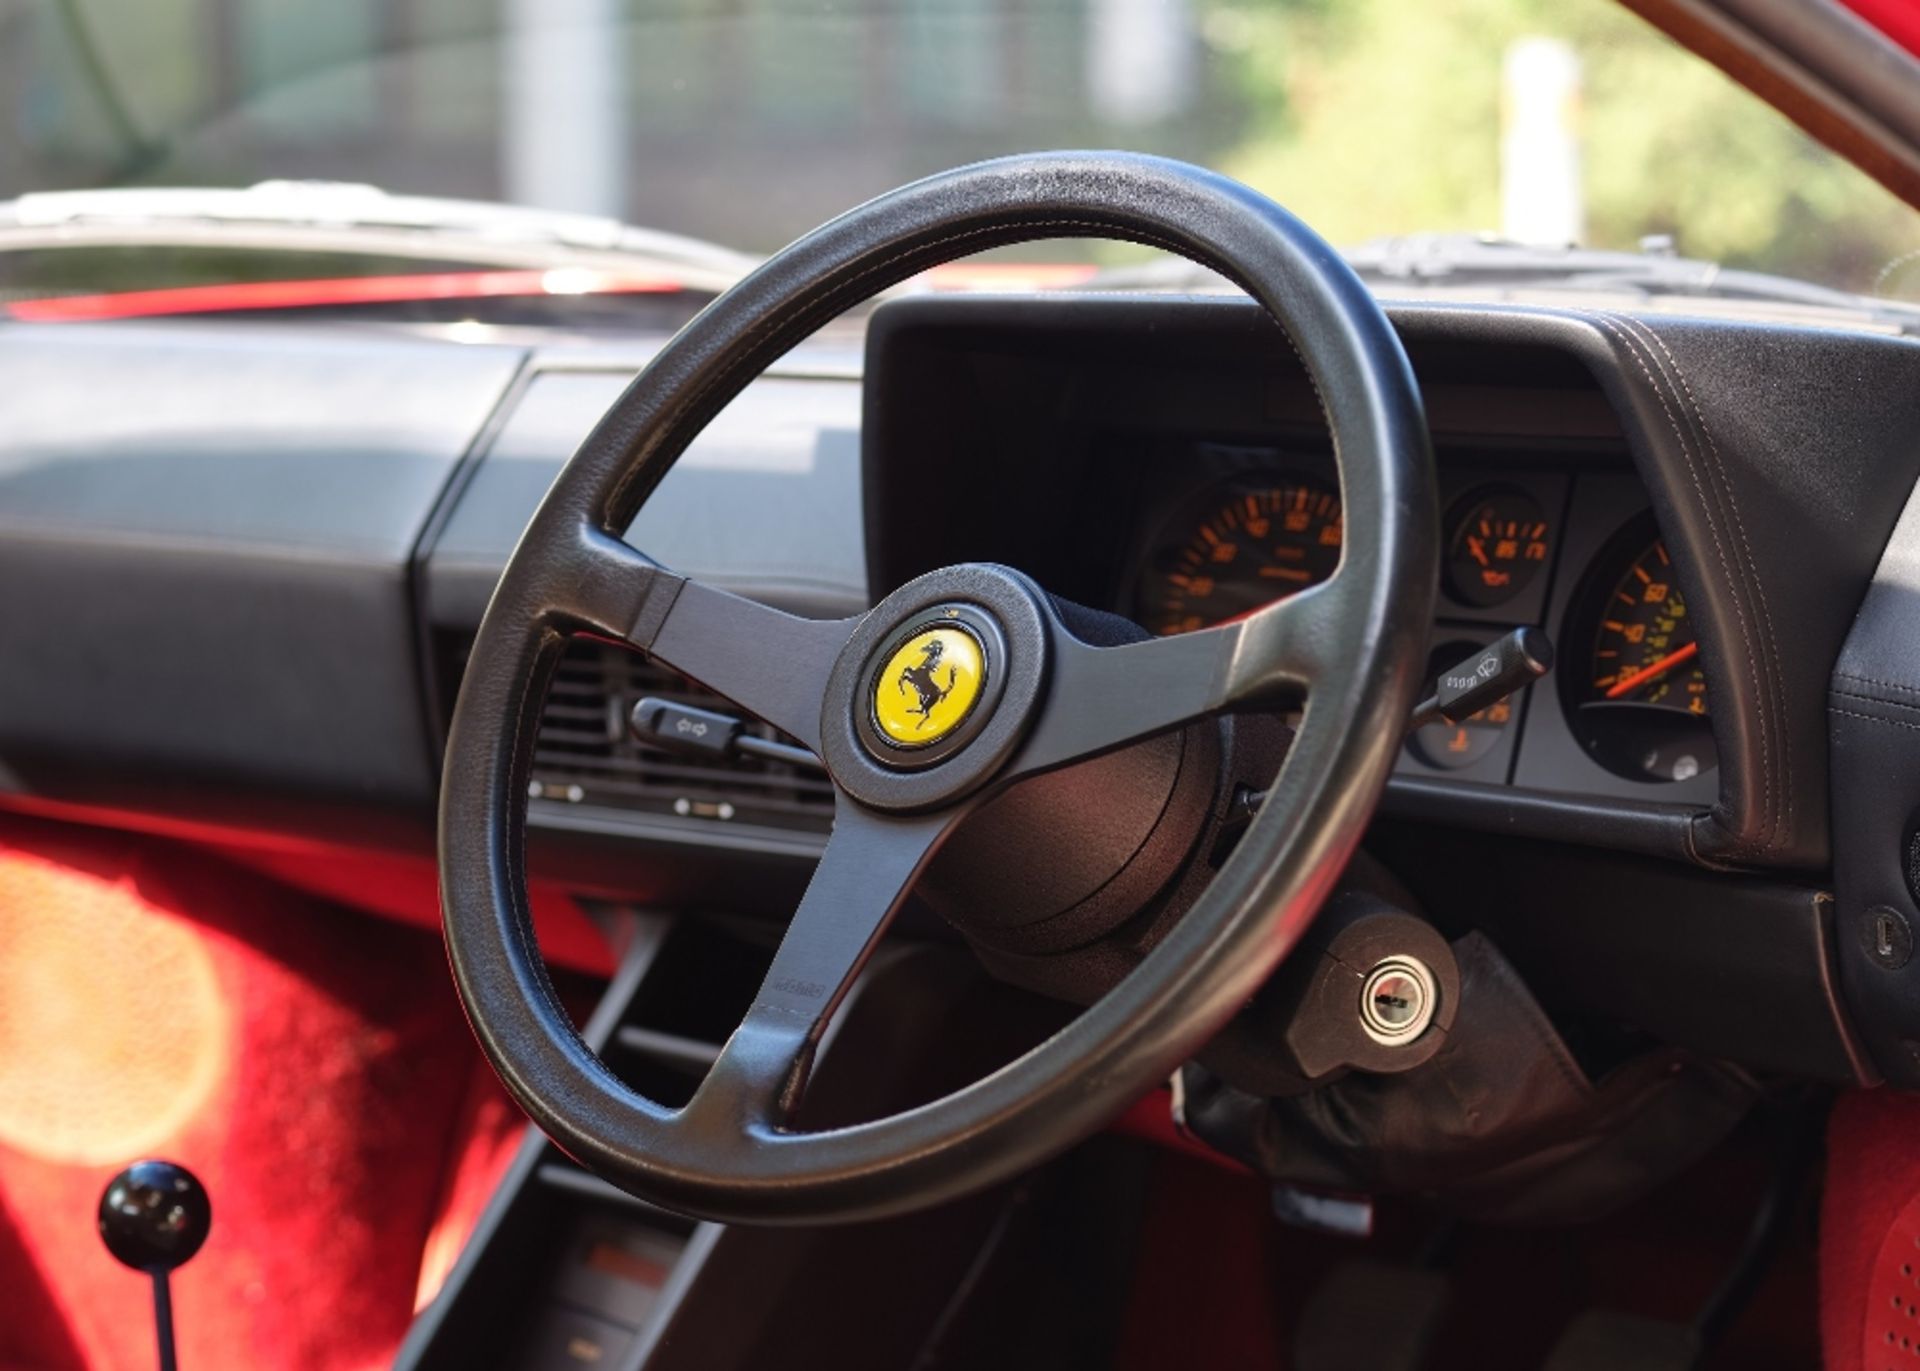 1989 FERRARI TESTAROSSA Registration Number: G441 WPN Chassis Number: ZFFAA17C000082817 Recorded - Image 32 of 59